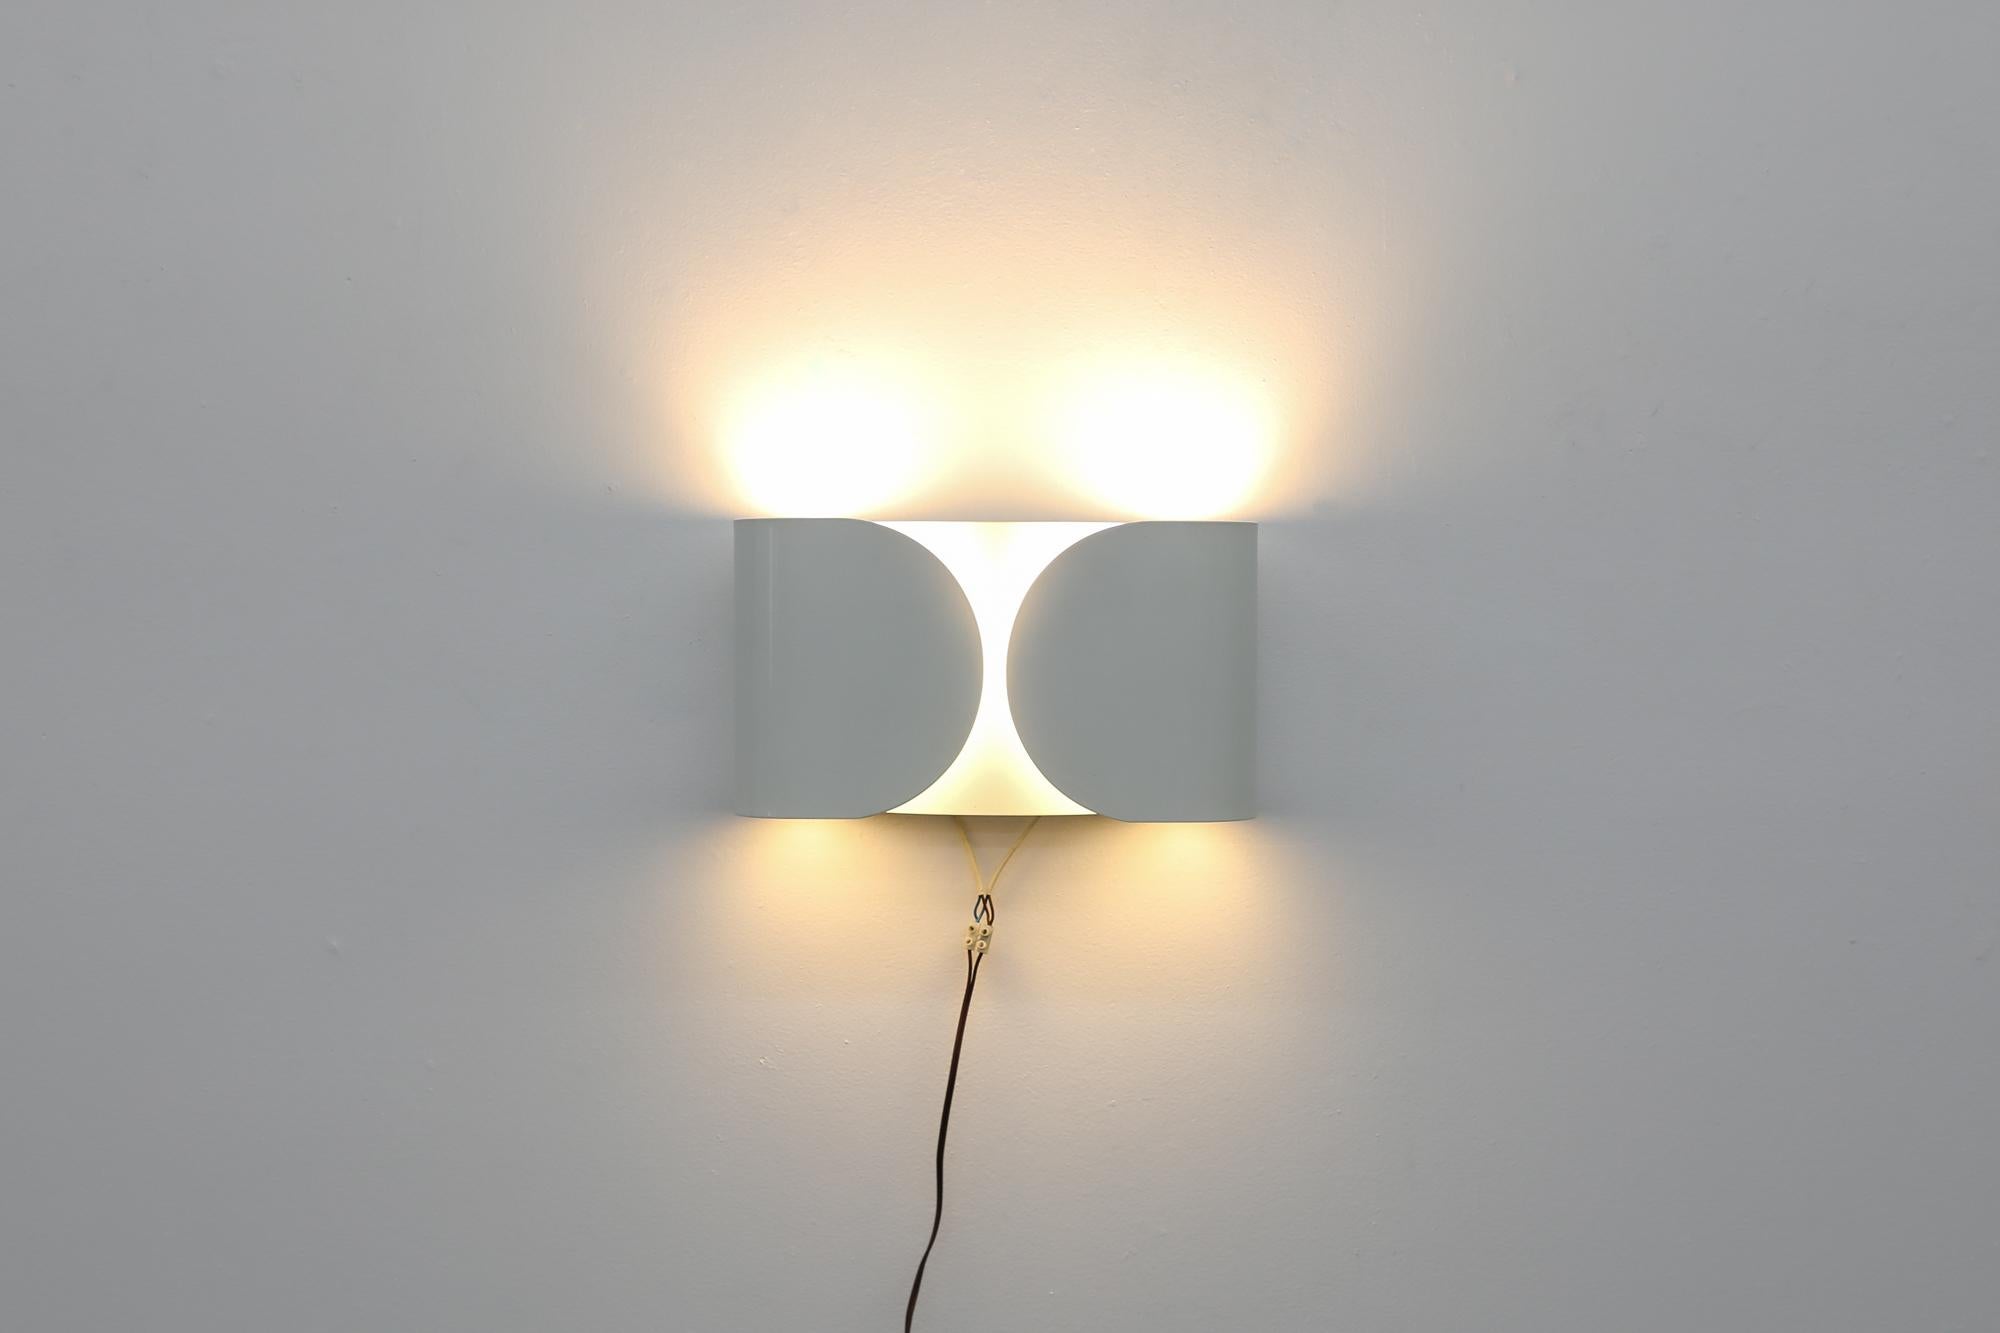 Mid-Century Modern Original Mid-Century White TS-Foglio Wall Lamps by Tobia Scarpa for Flos, 1960s For Sale